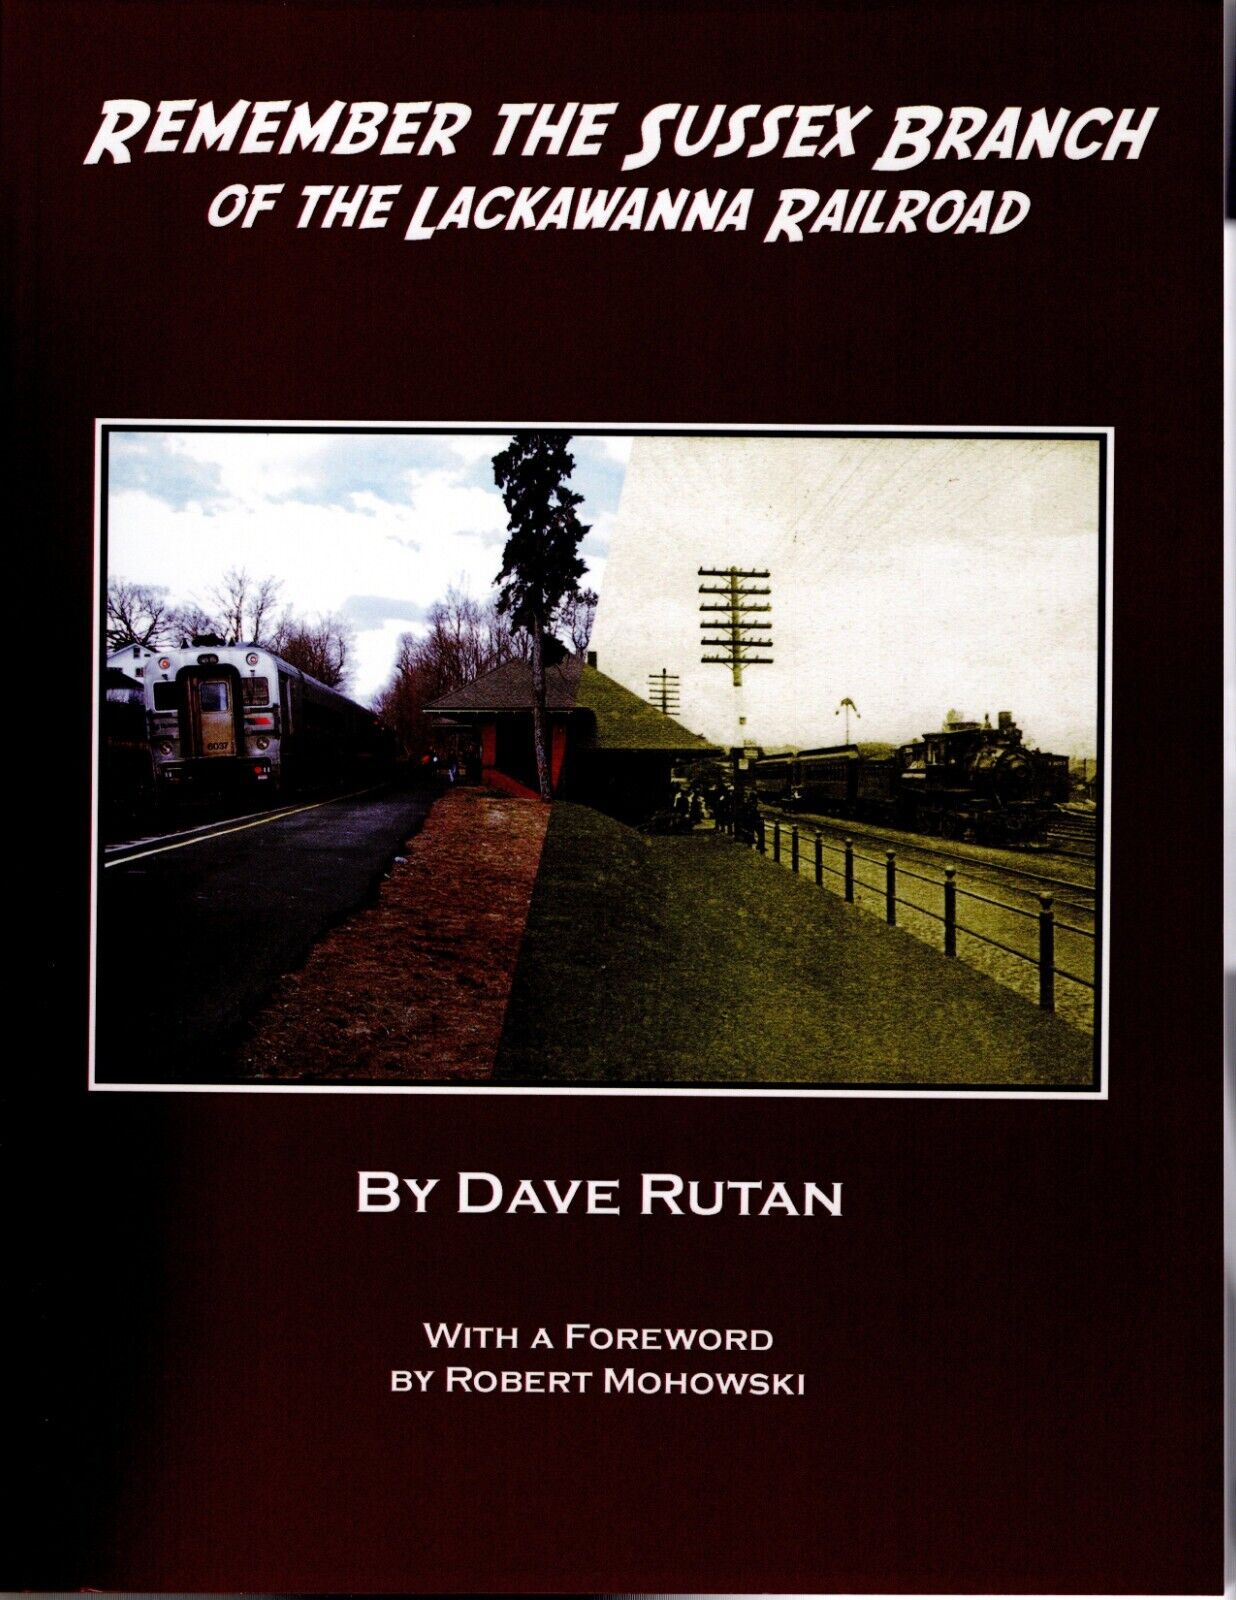 Remembering the Sussex Branch of the Lackawanna Railroad